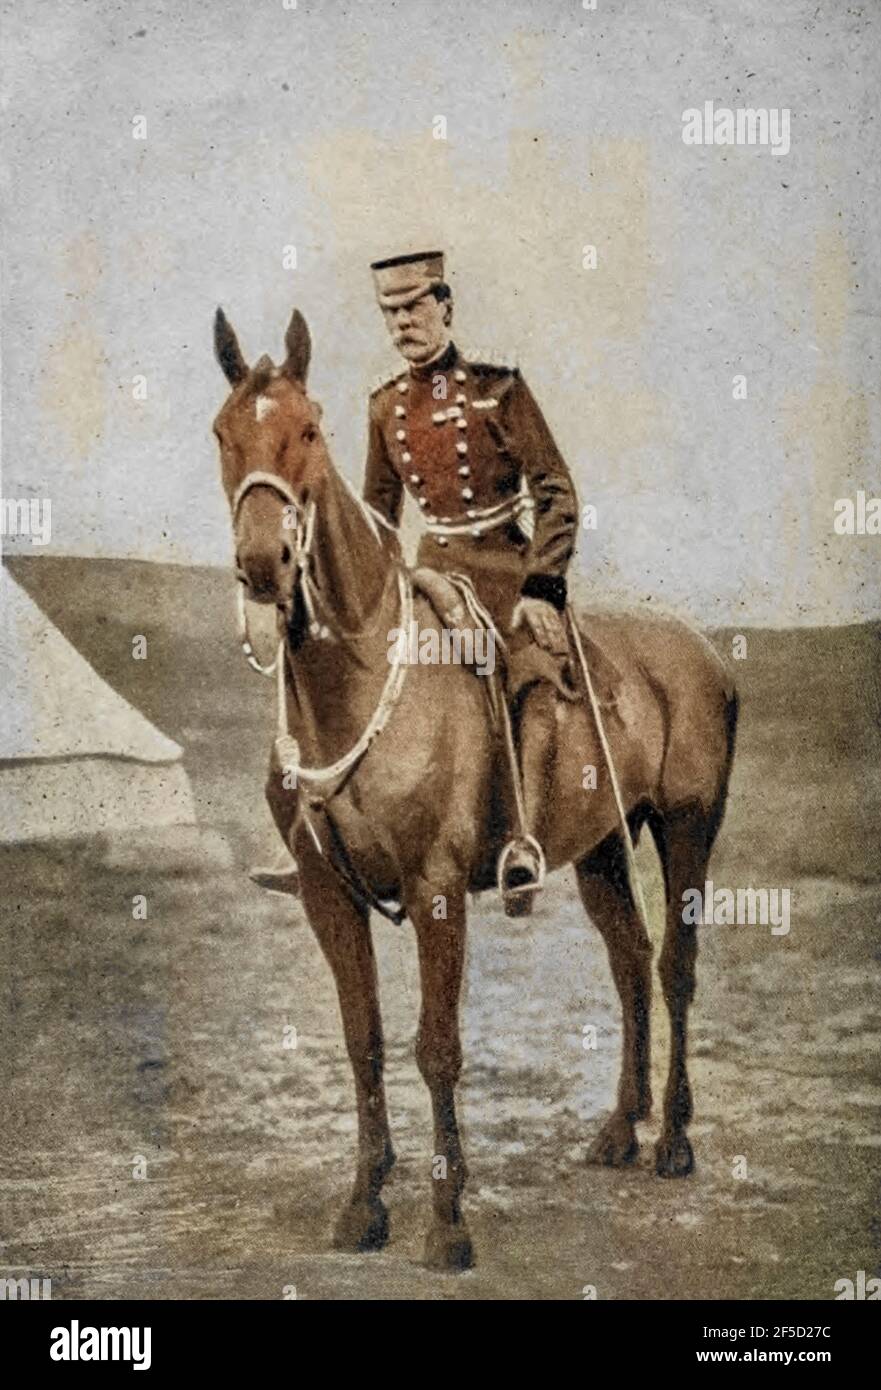 Field Marshal Paul Sanford Methuen, 3rd Baron Methuen, GCB, GCMG, GCVO, DL (1 September 1845 – 30 October 1932) was a British Army officer. He served in the Third Anglo-Ashanti War in 1873 and then in the expedition of Sir Charles Warren to Bechuanaland in the mid 1880s. He took a prominent role as General Officer Commanding the 1st Division in the Second Boer War. He suffered a serious defeat at the Battle of Magersfontein, during which he failed to carry out adequate reconnaissance and accordingly his artillery bombarded the wrong place leading to the Highland Brigade taking heavy casualties Stock Photo